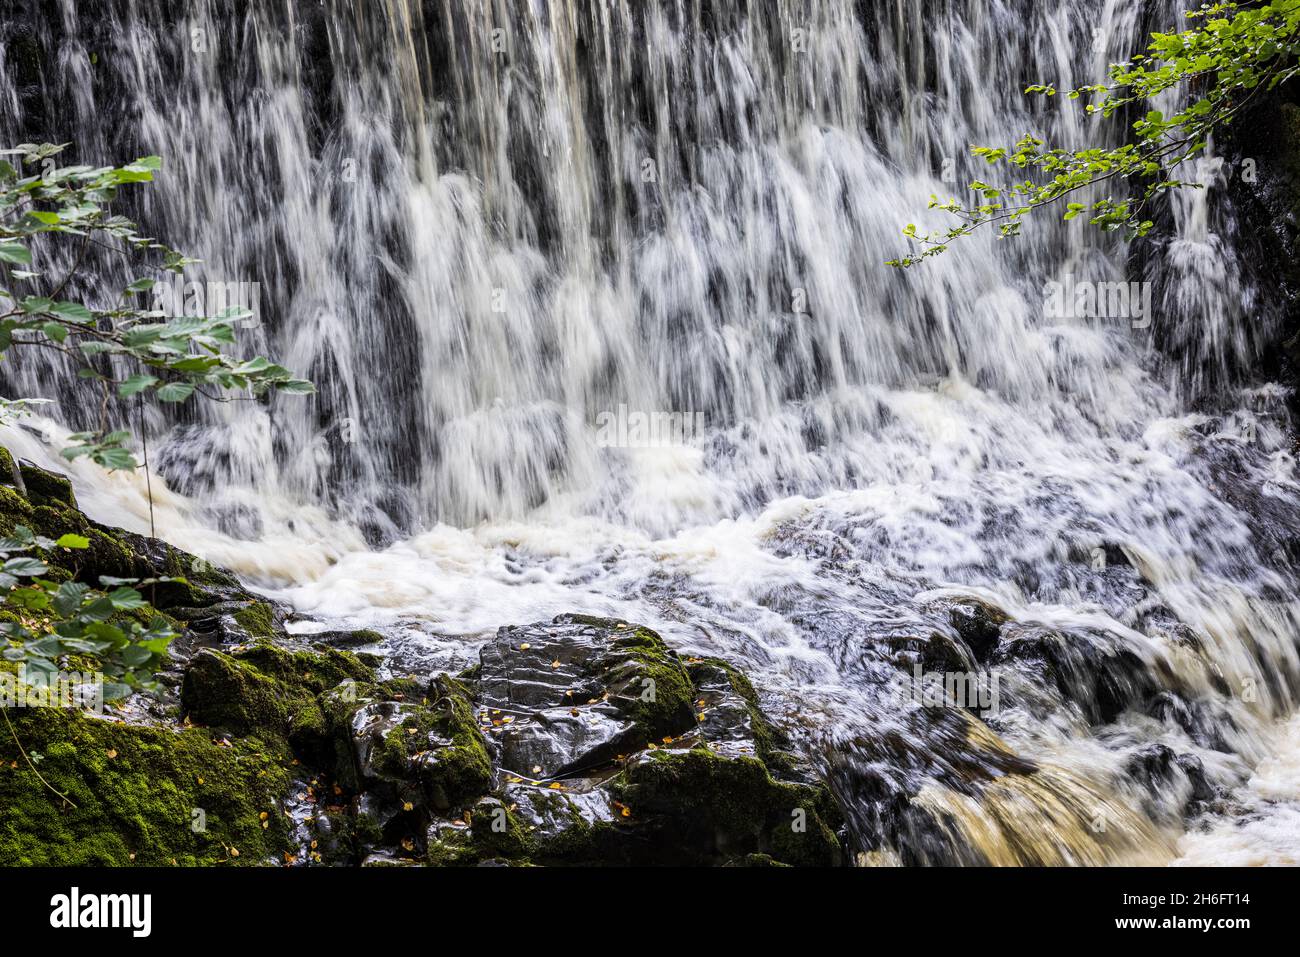 Waterfall on the Silver river flowing over stones near Cadamstown, County Offaly, Ireland Stock Photo